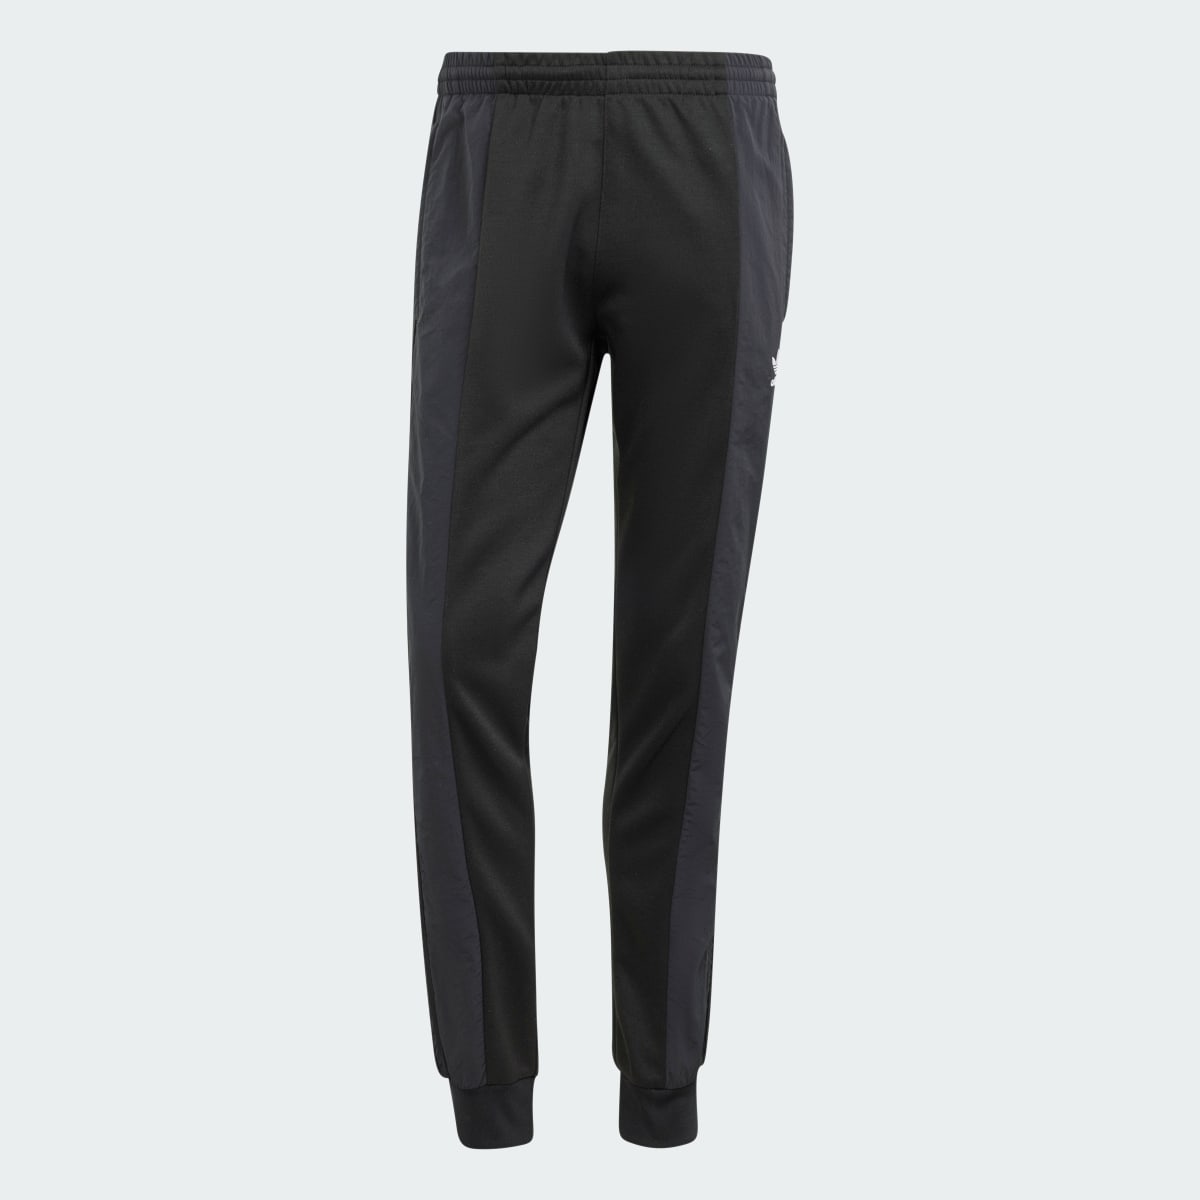 Adidas Adicolor Re-Pro SST Material Mix Tracksuit Bottoms. 4